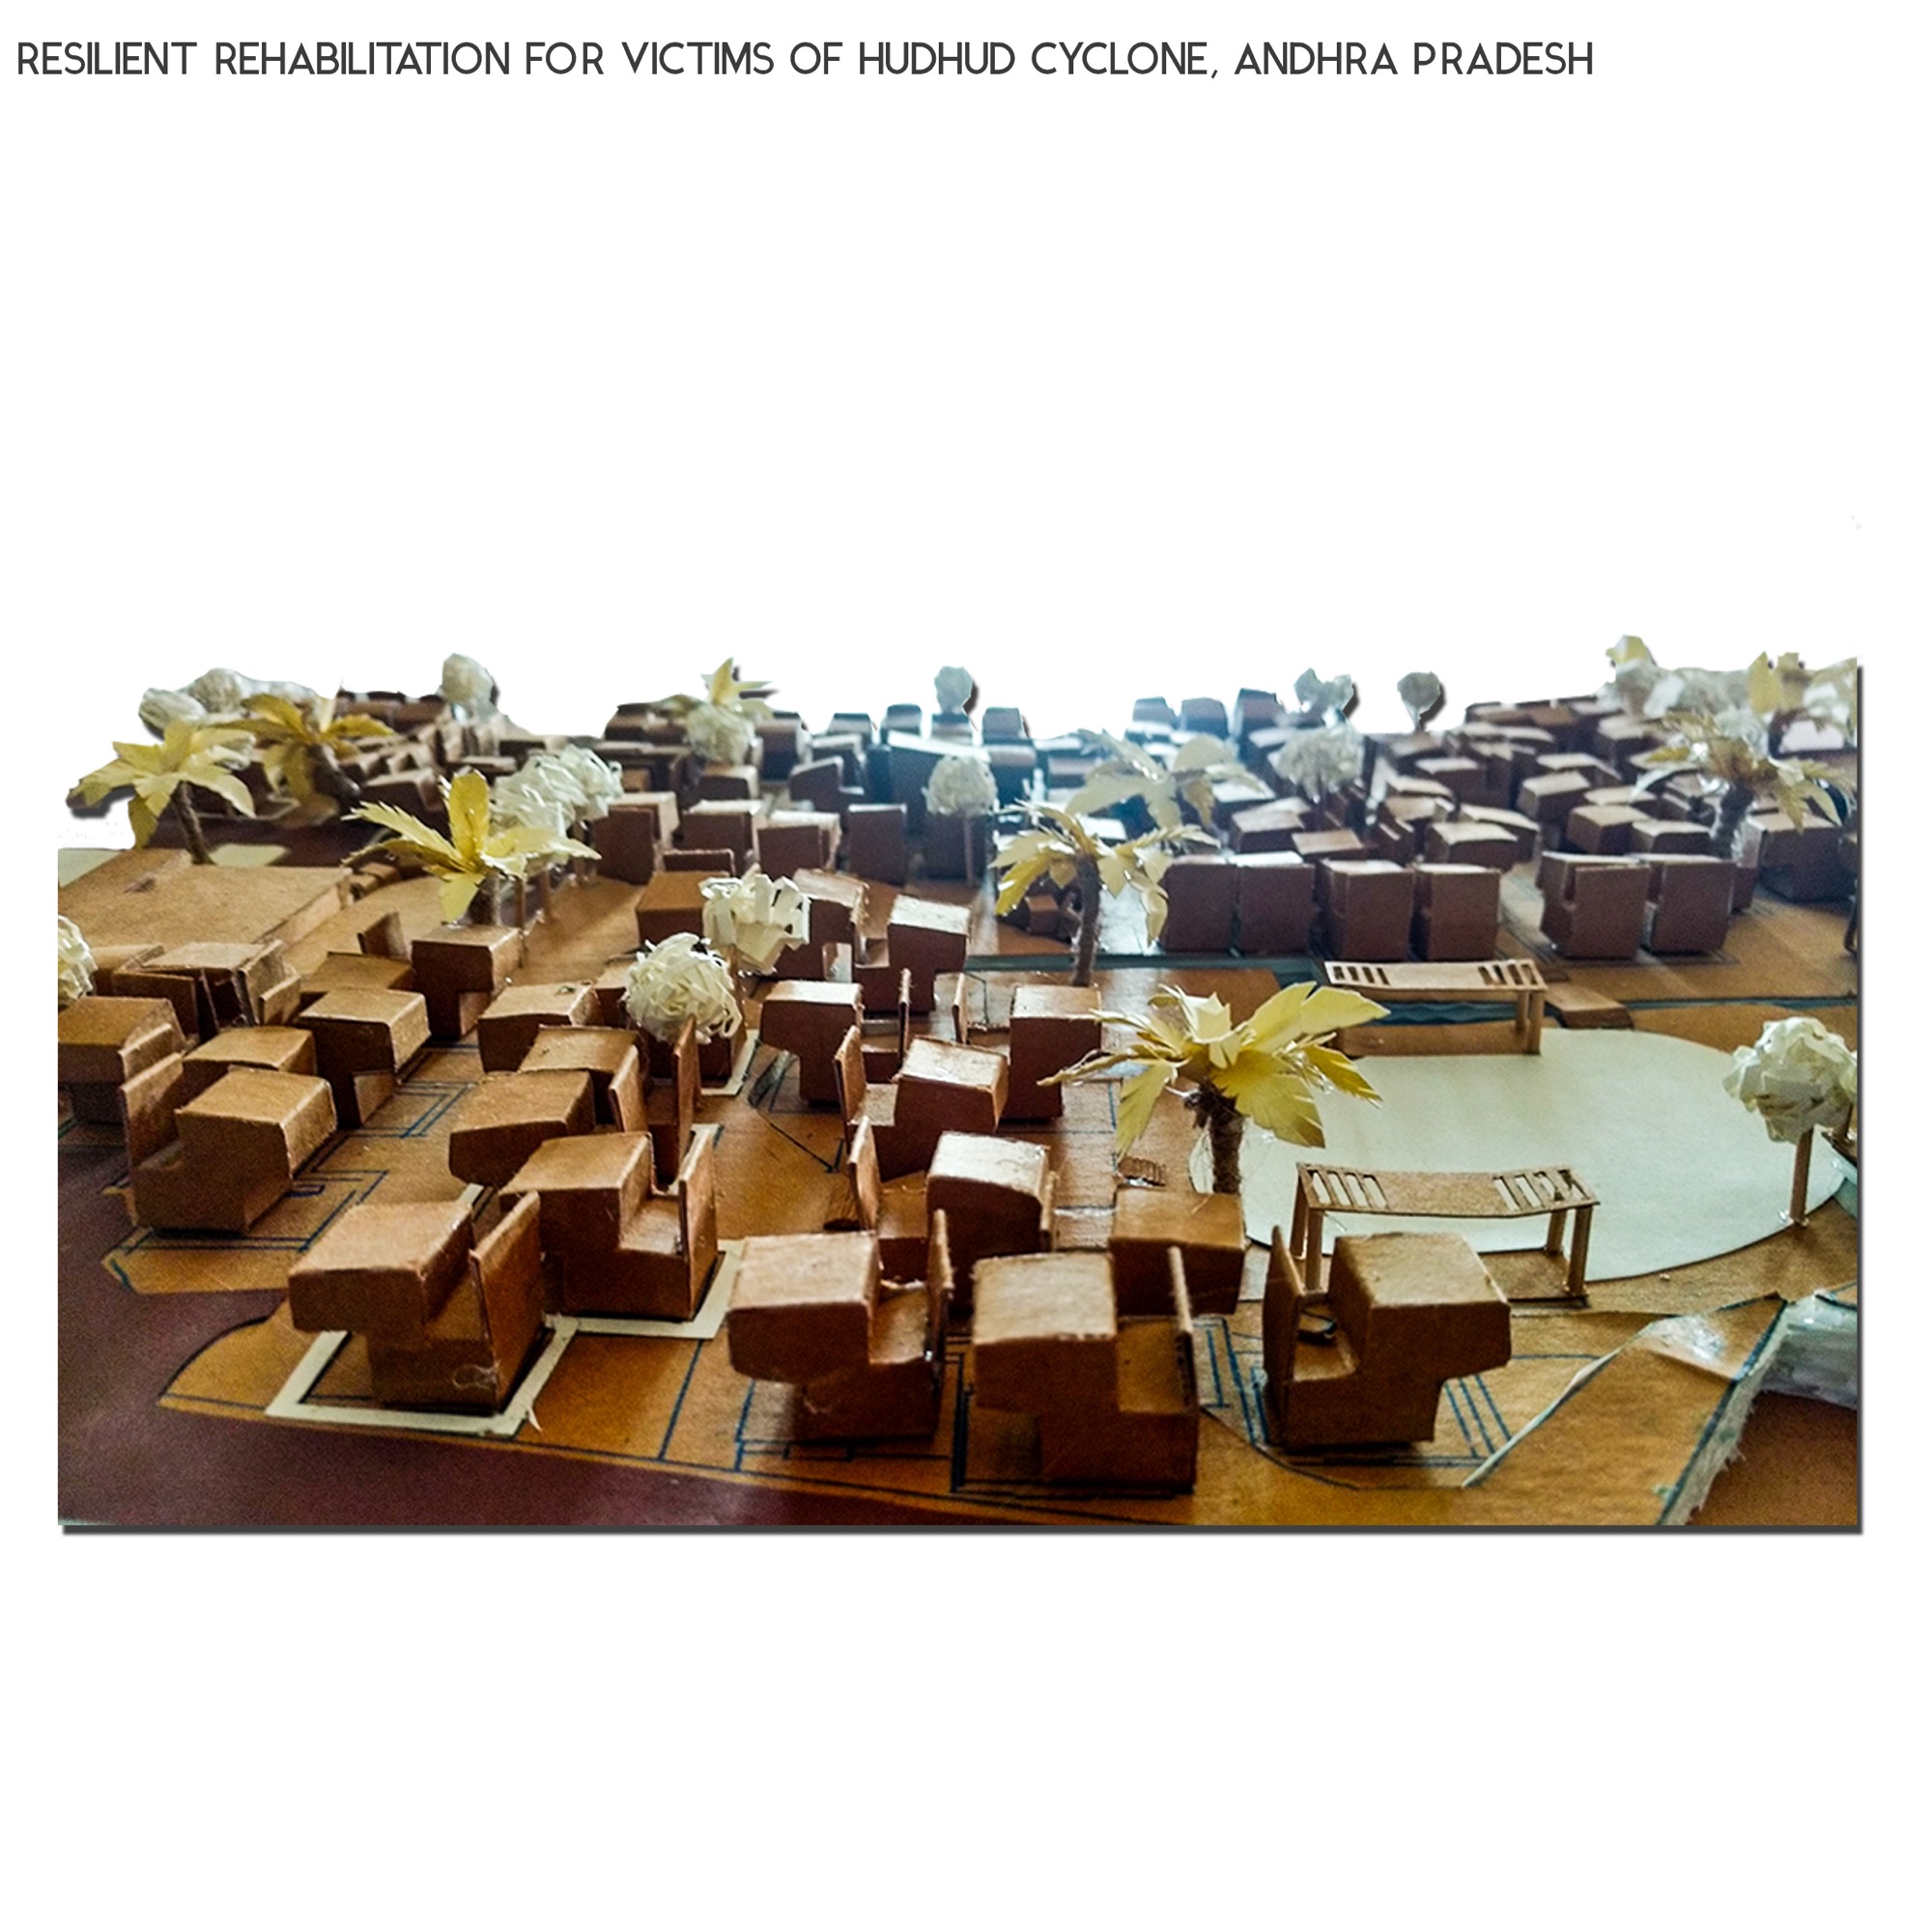 B.Arch Thesis: RESILIENT REHABILITATION FOR VICTIMS OF HUDHUD CYCLONE, ANDHRA PRADESH, by Sanand Telang 51